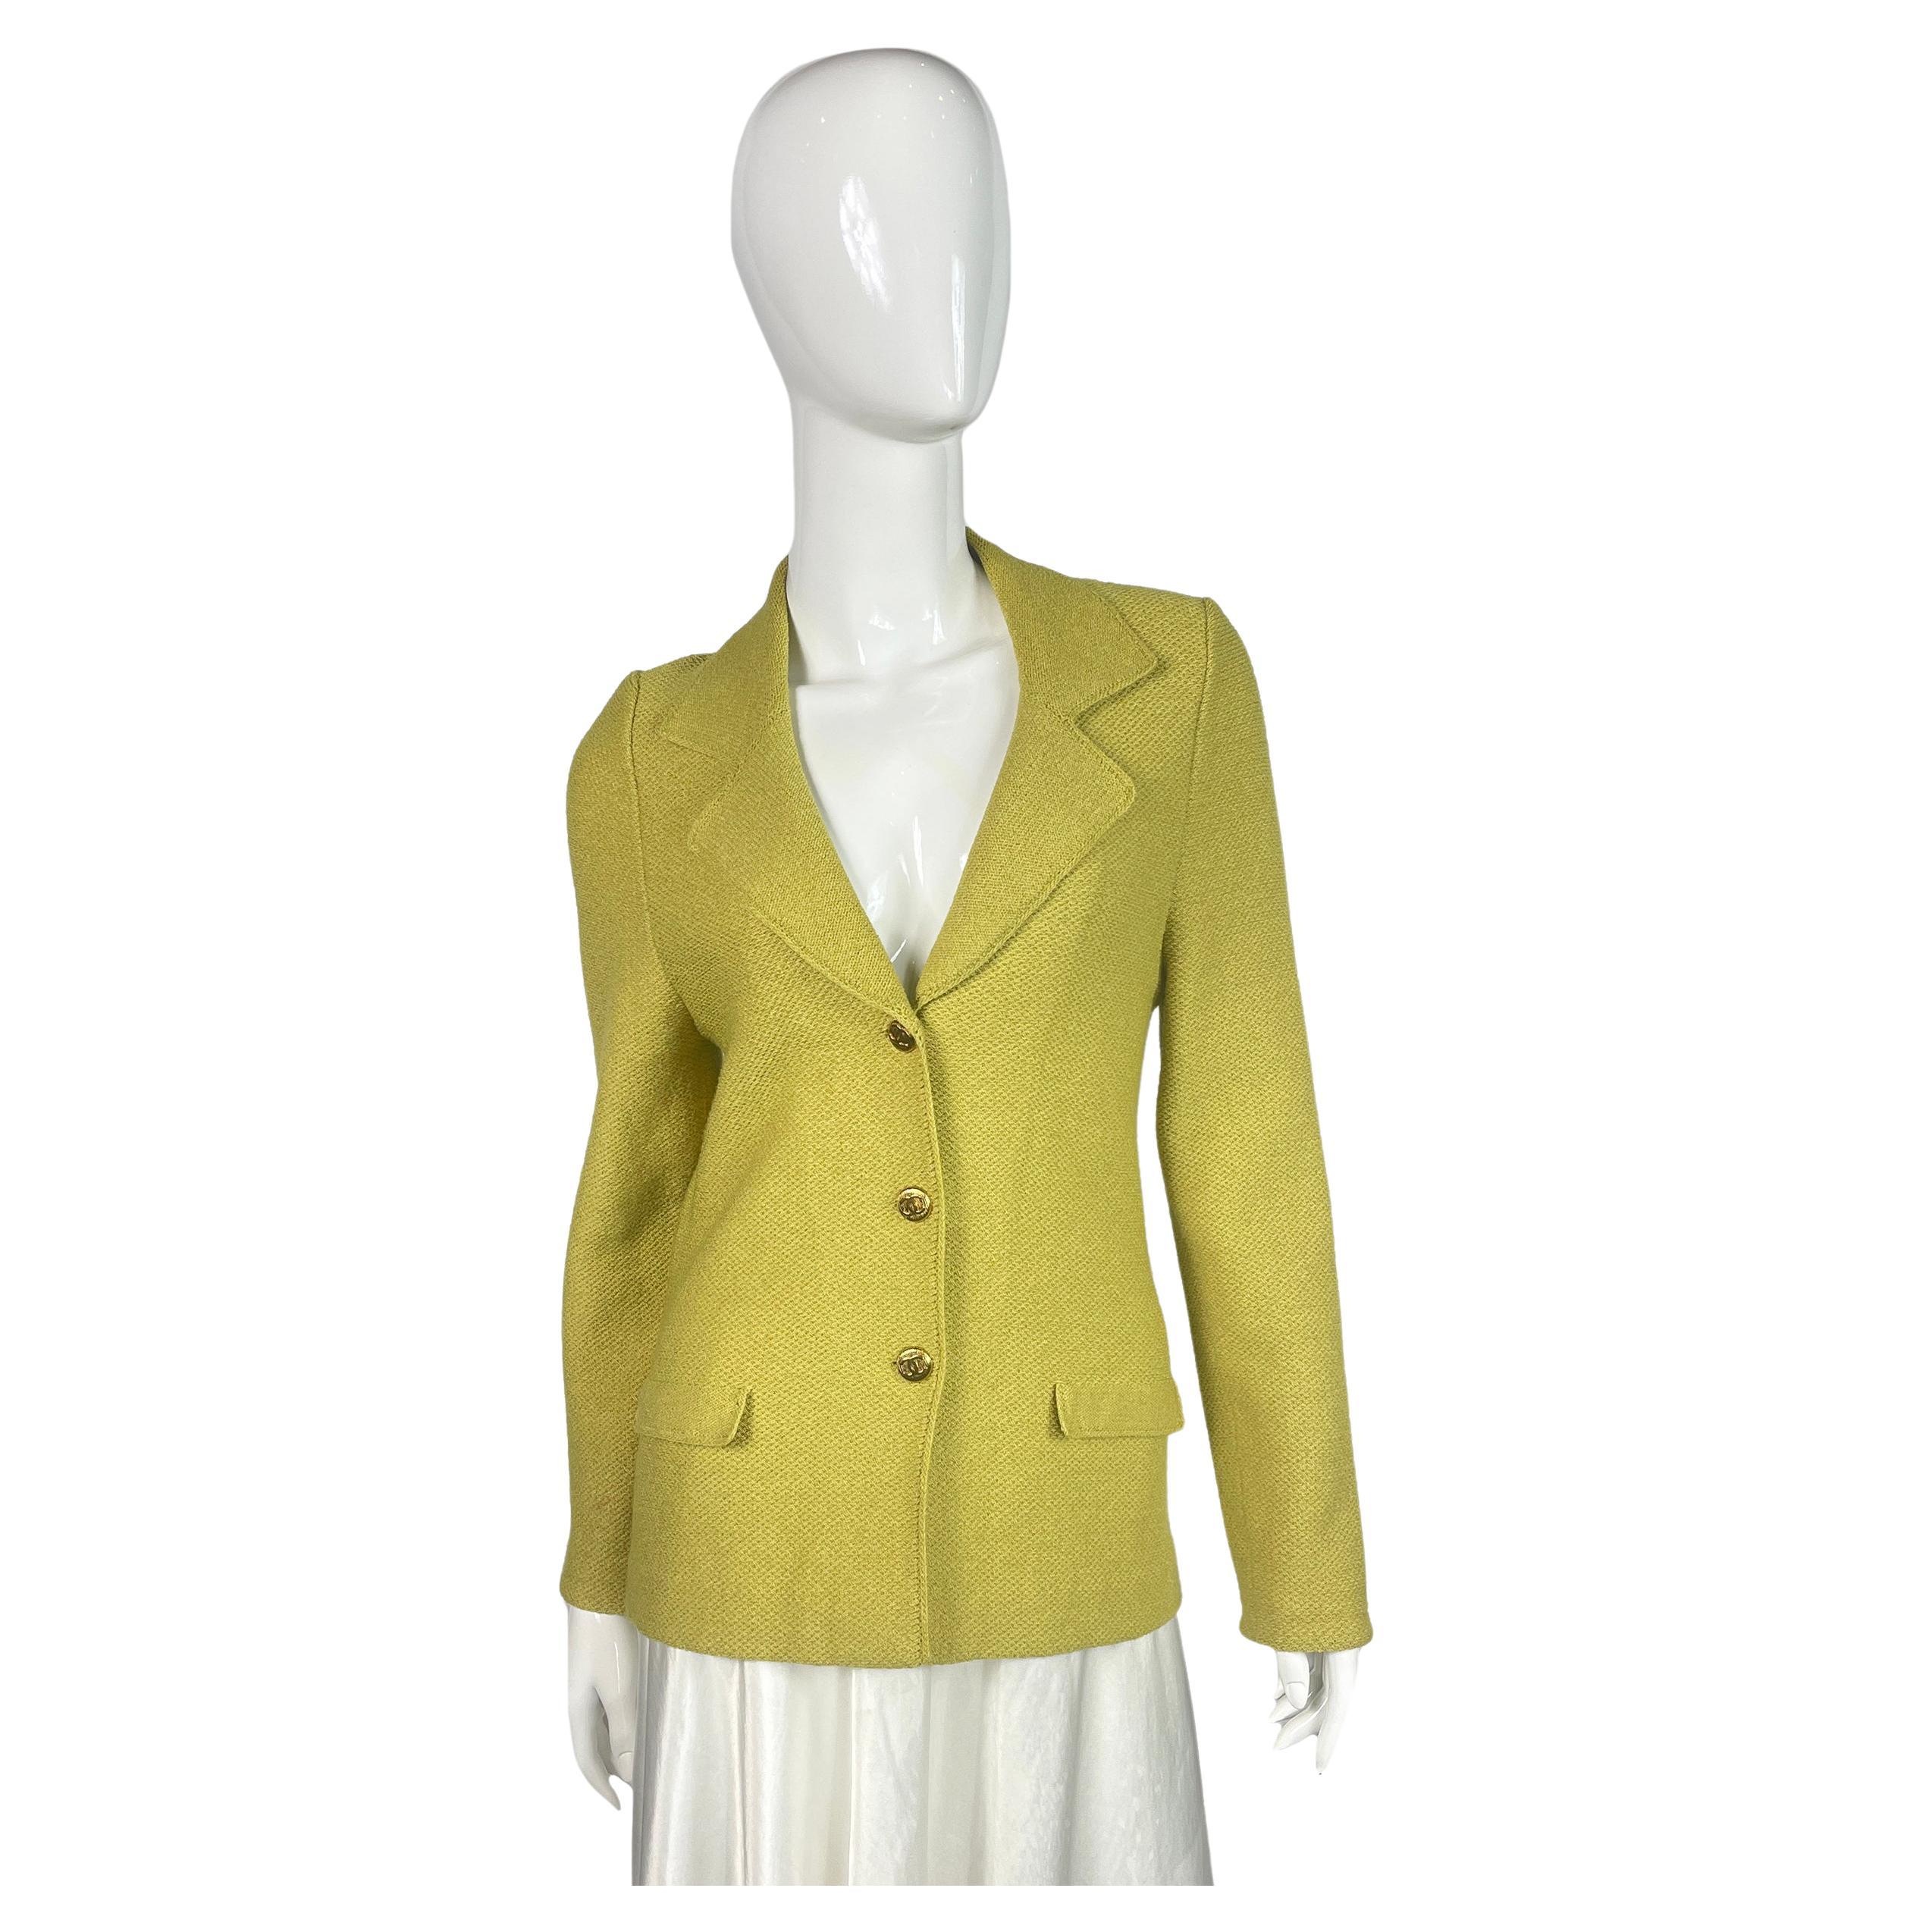 Chanel Lemon Vintage Knitted Blazer, Late 1980’s – Early 1990’s